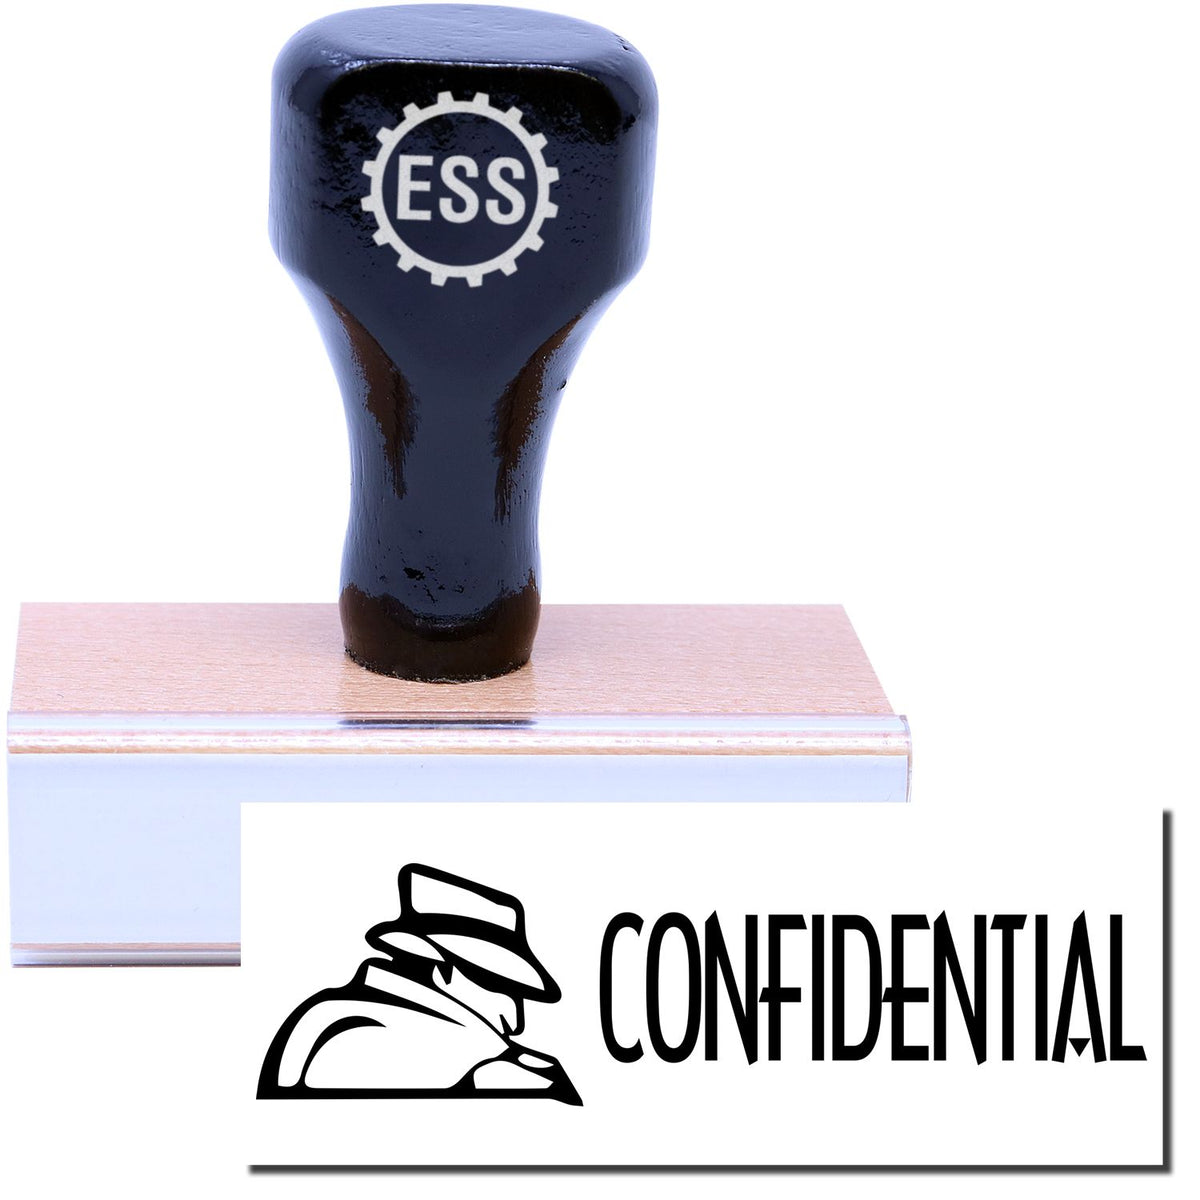 A stock office rubber stamp with a stamped image showing how the text &quot;CONFIDENTIAL&quot; in a large font with an eye-catching logo on the left is displayed after stamping.